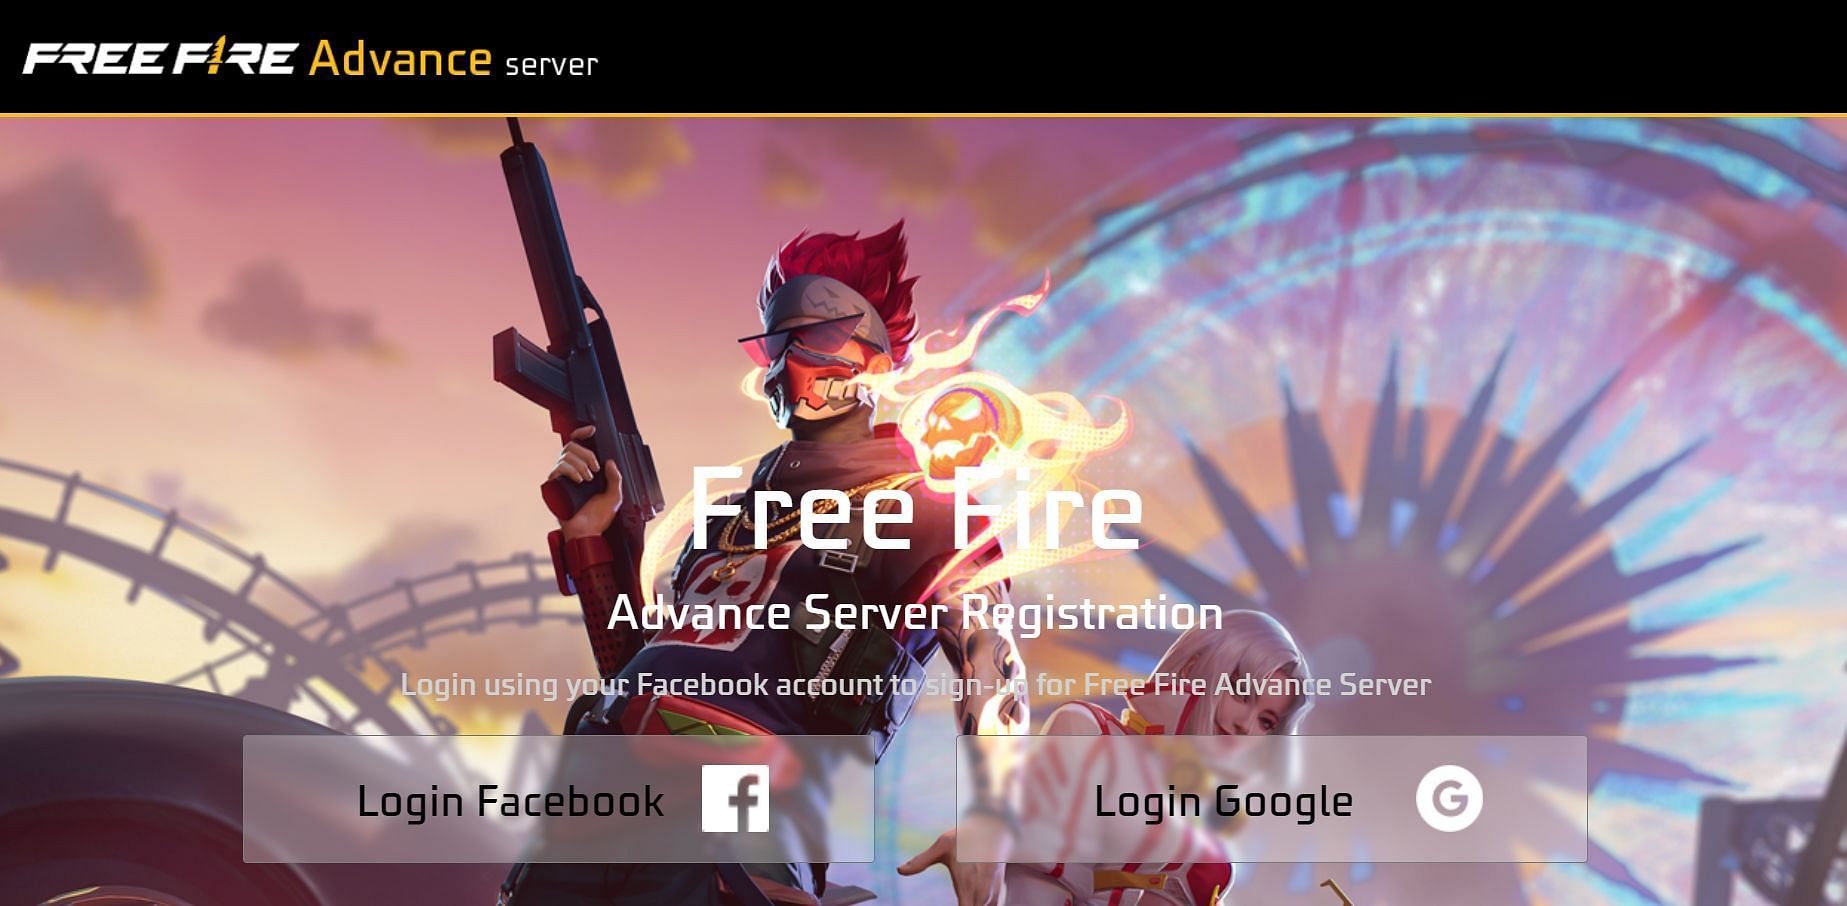 Complete the login using one of the two platforms (Image via Garena)